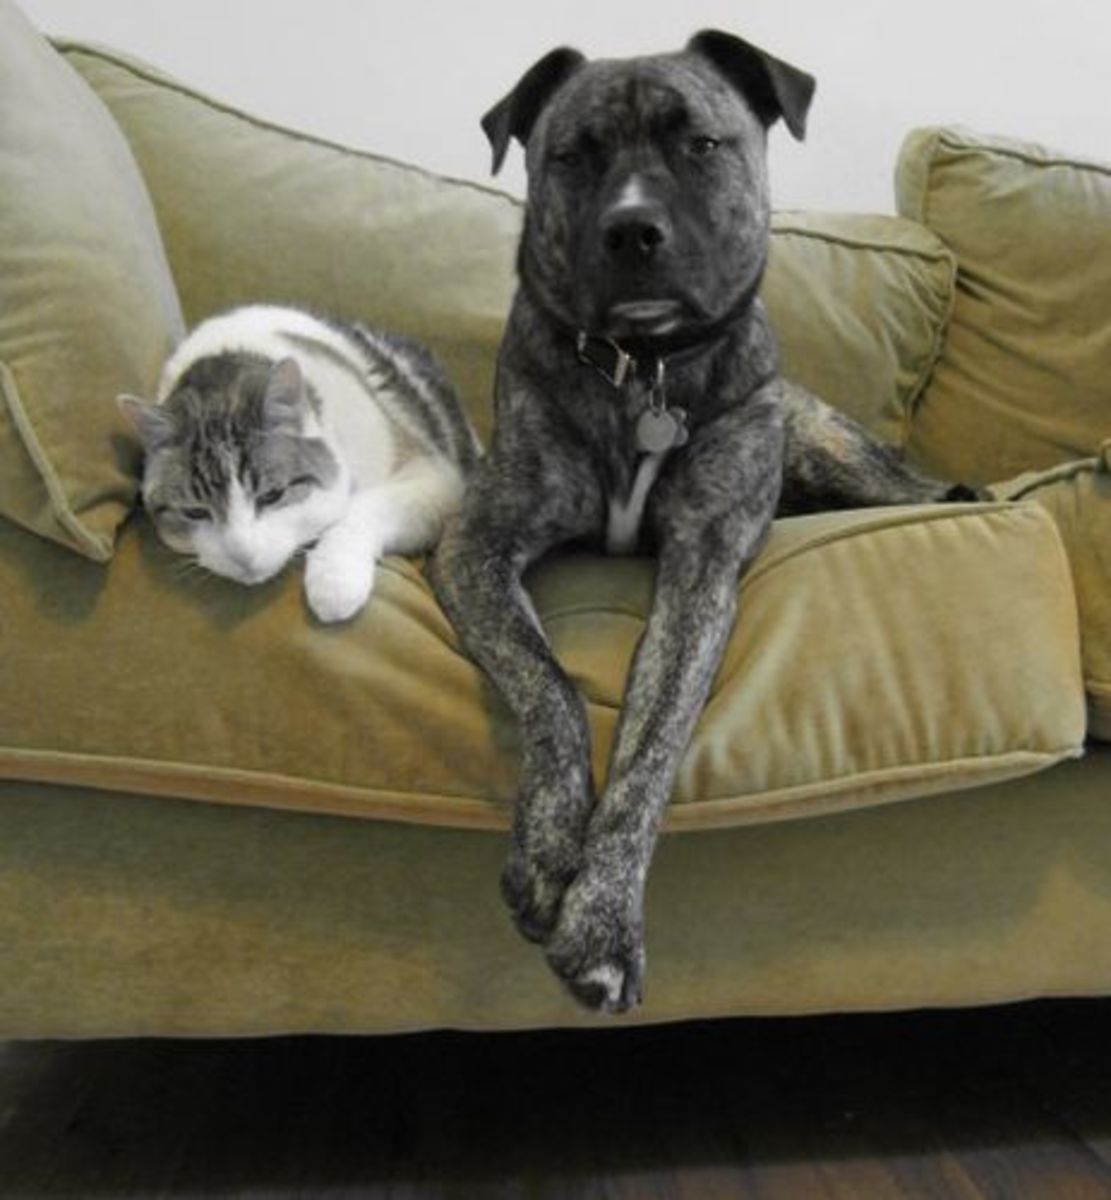 Dogs and Cats can Coexist